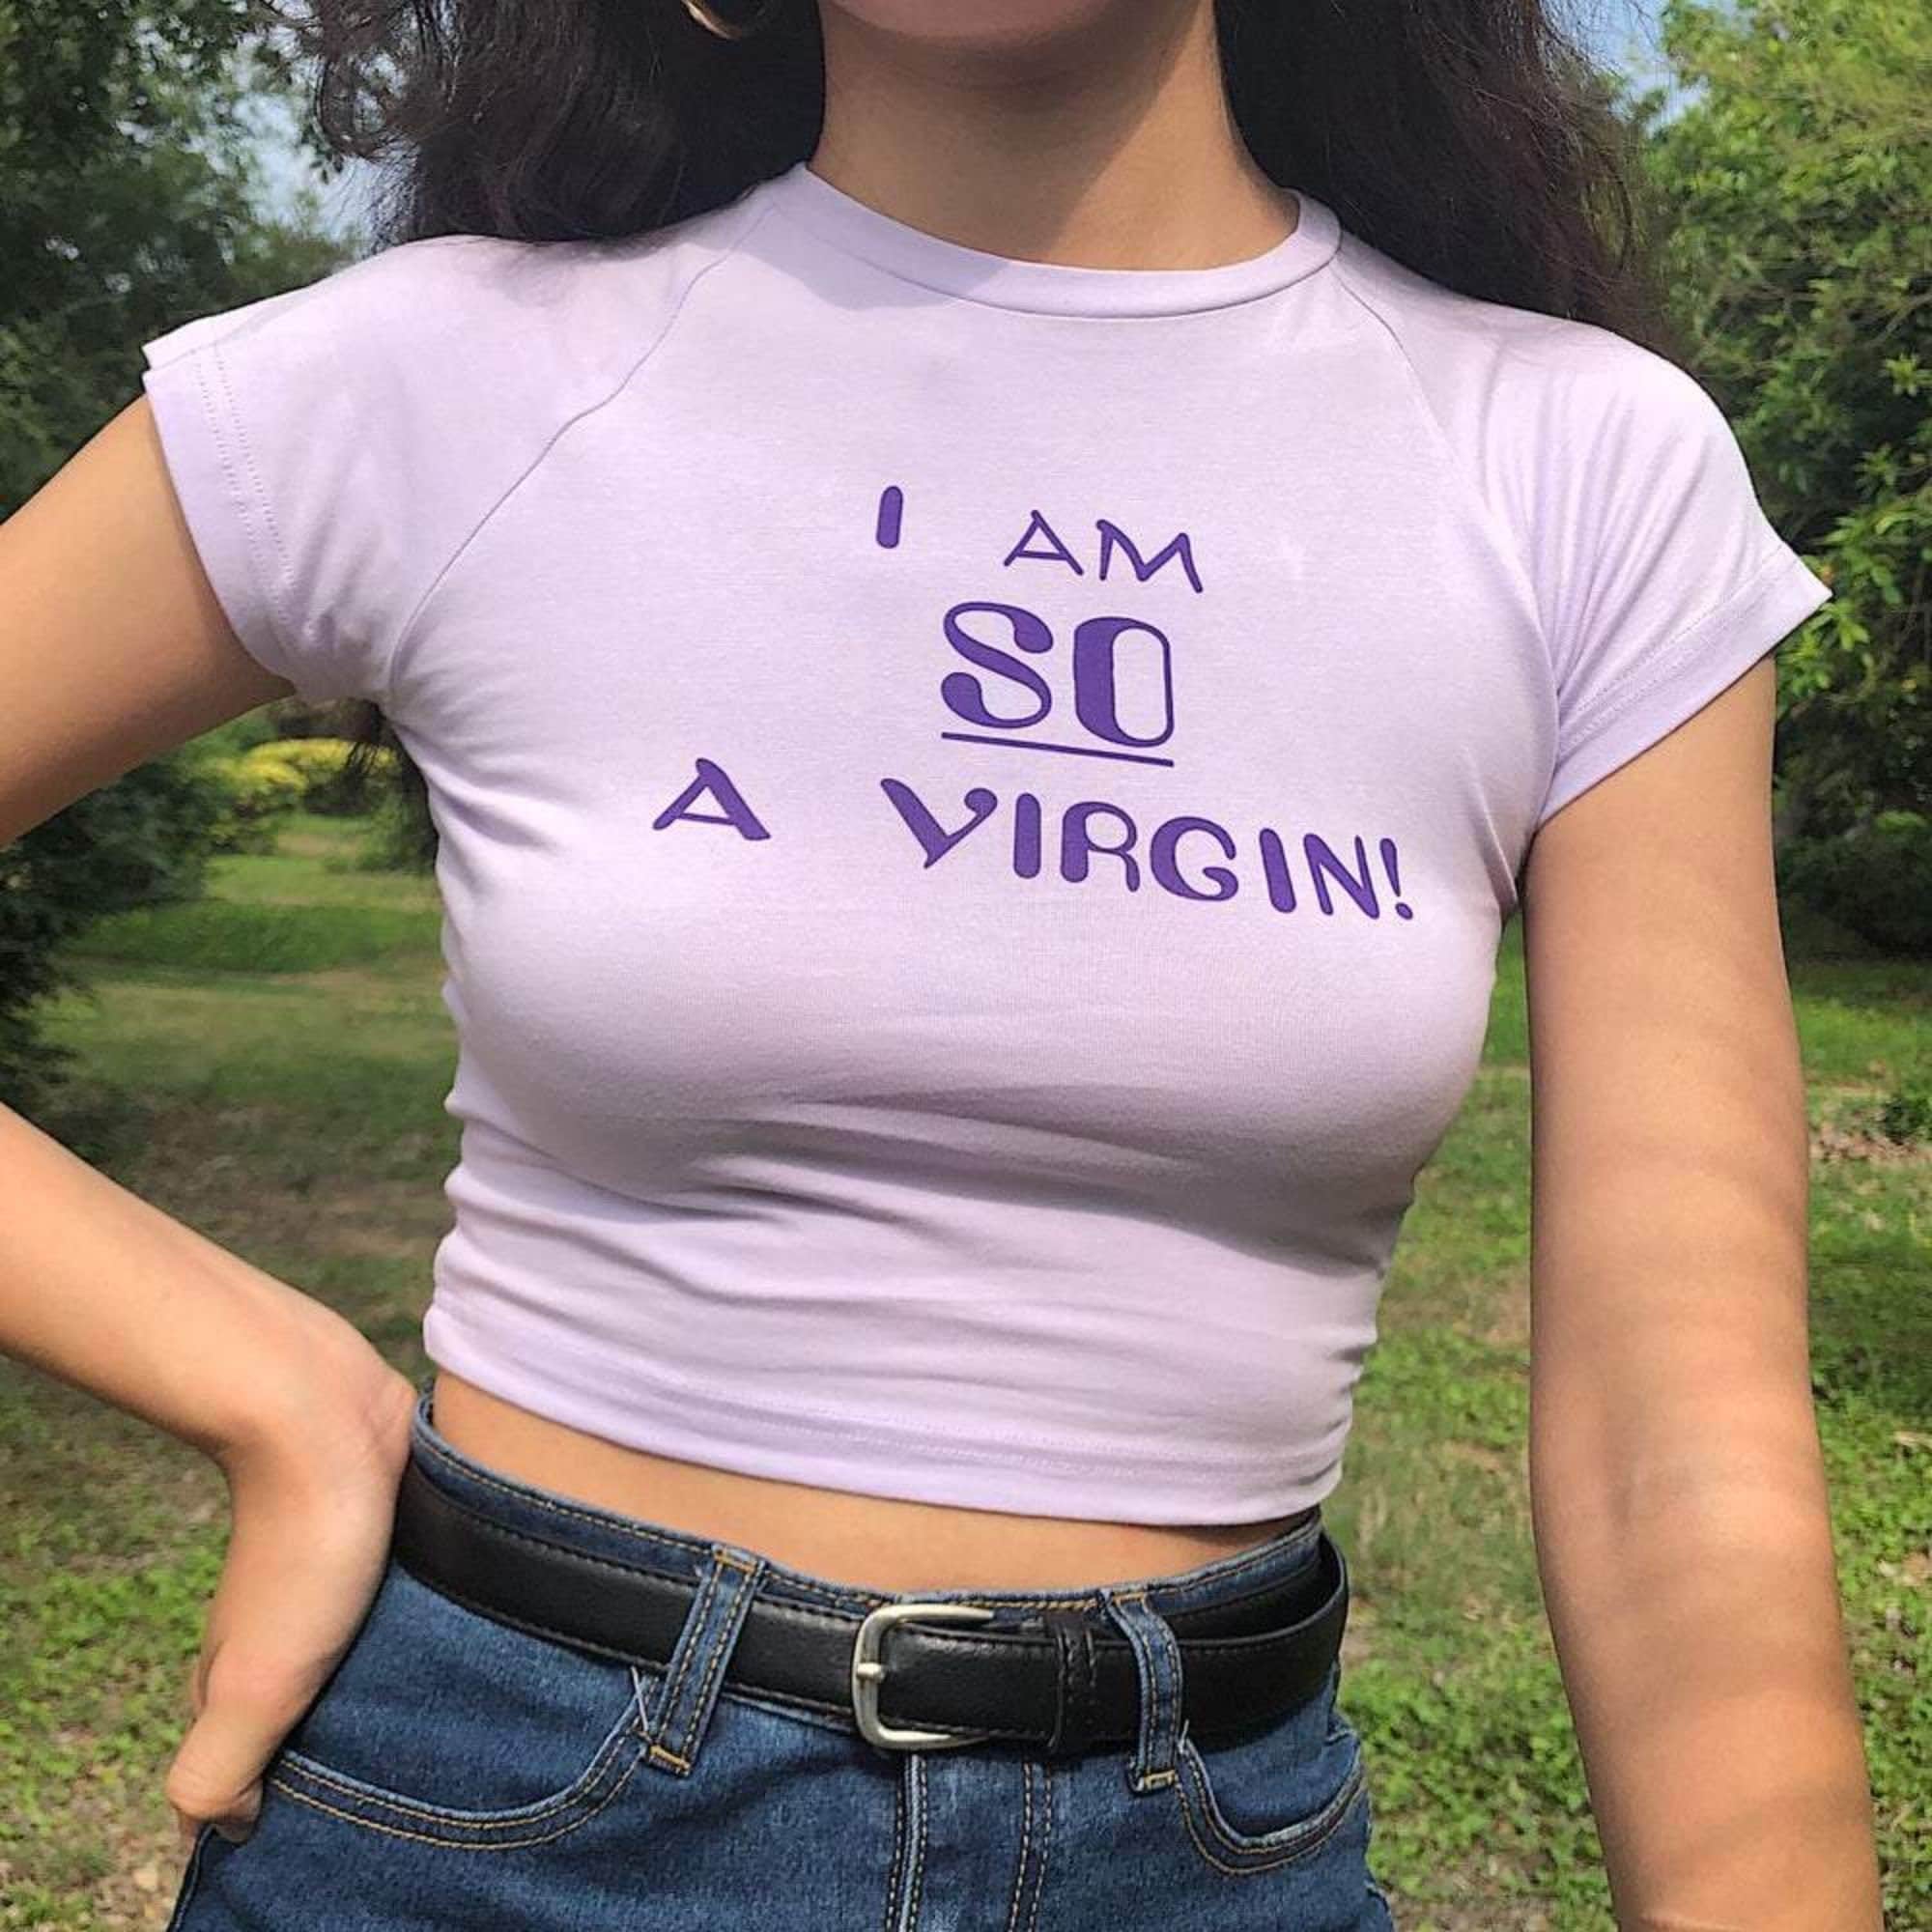 I Am So A Virgin Baby Tee Y2k Baby Tee Cute Y2k Shirt 2000s Clothing Streetwear Vintage Retro Y2k Tshirts Gifts For Her